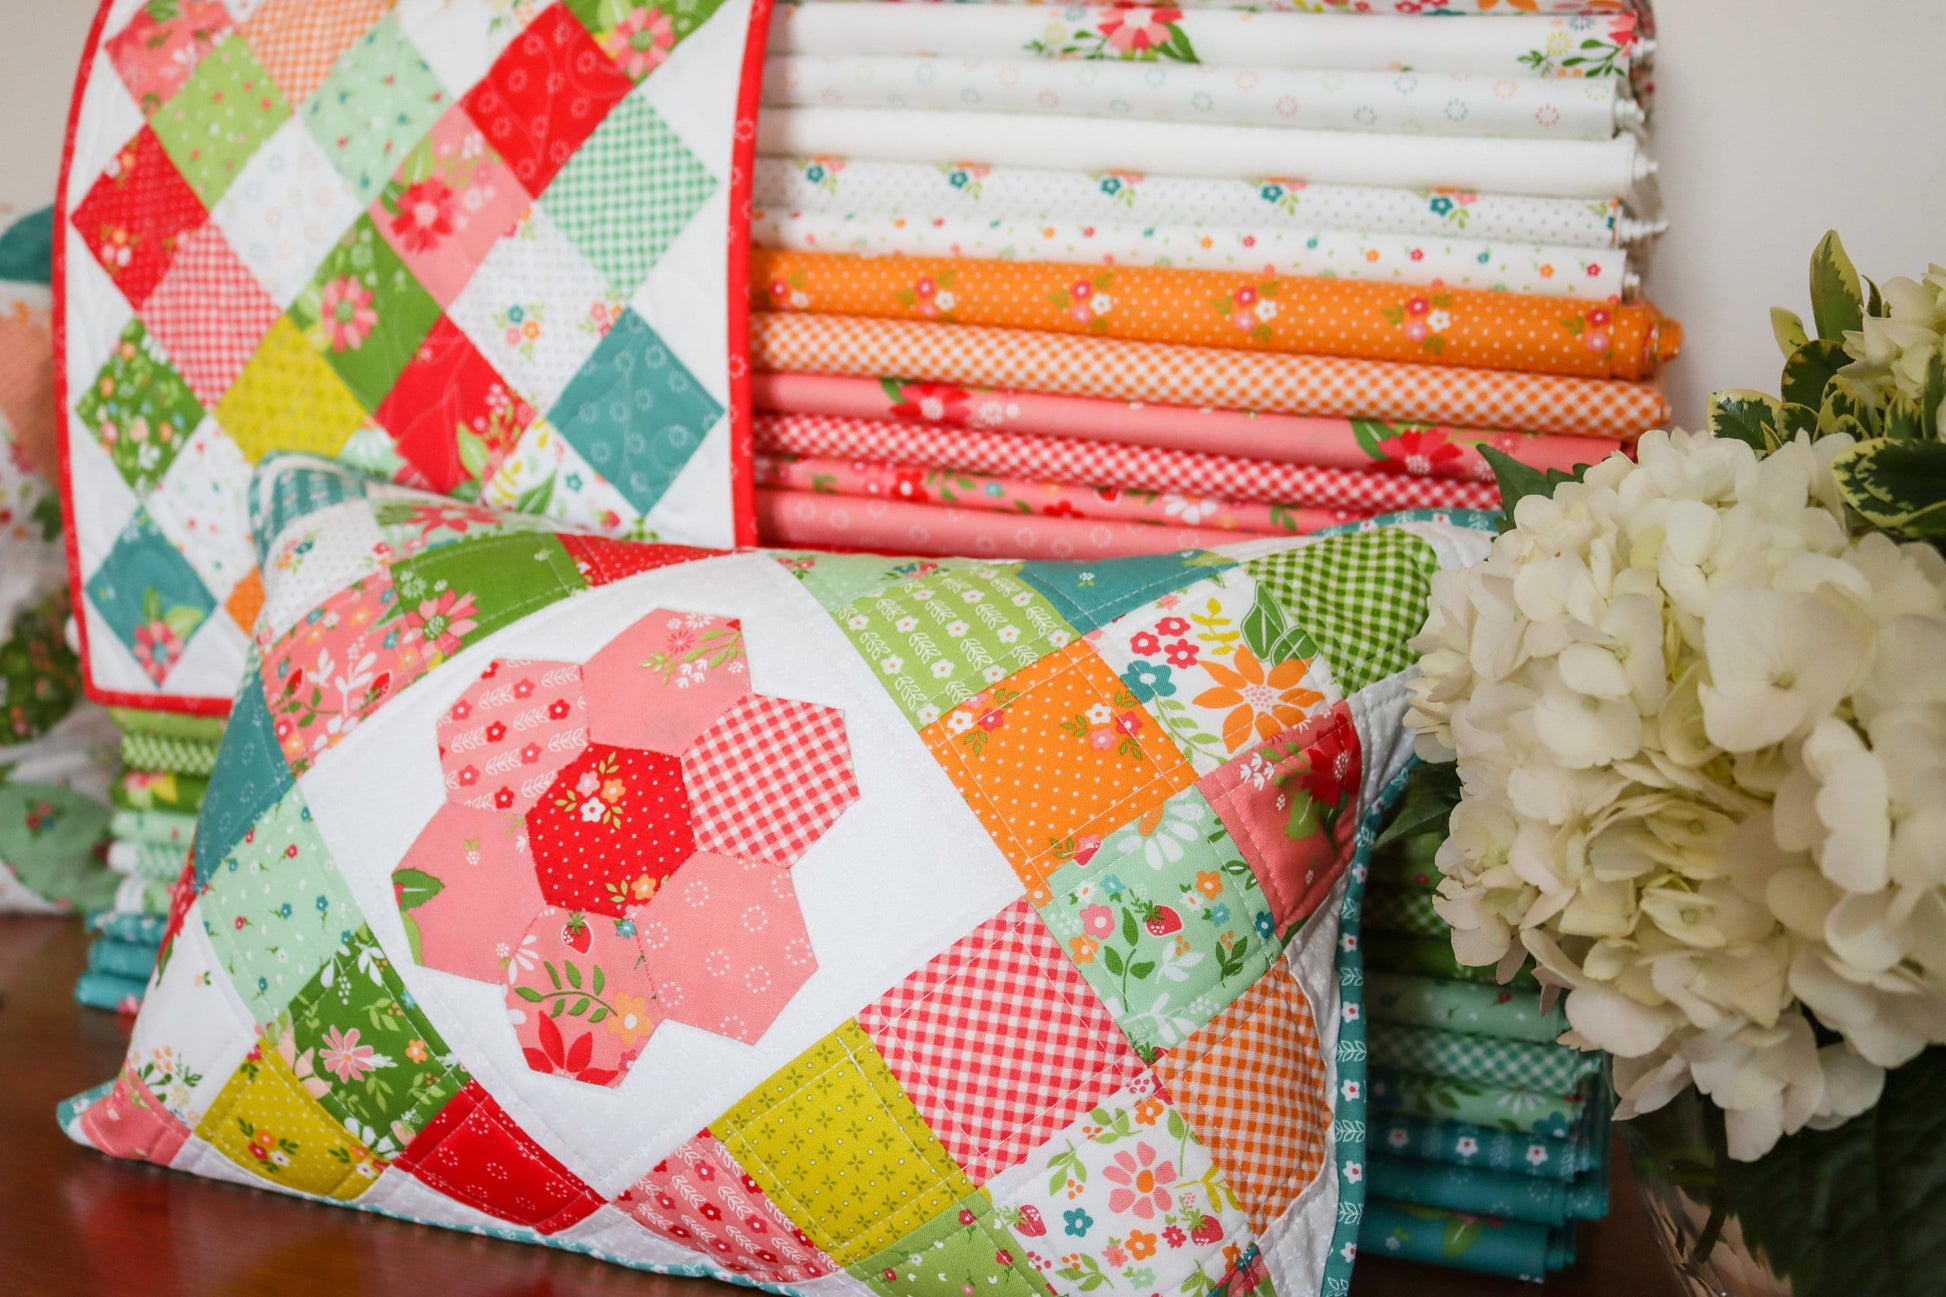 Strawberry Lemonade Bouquets Florals Dots in Apricot by Sherri & Chelsi for Moda. Continuous cuts of Quilter's Cotton Fabric